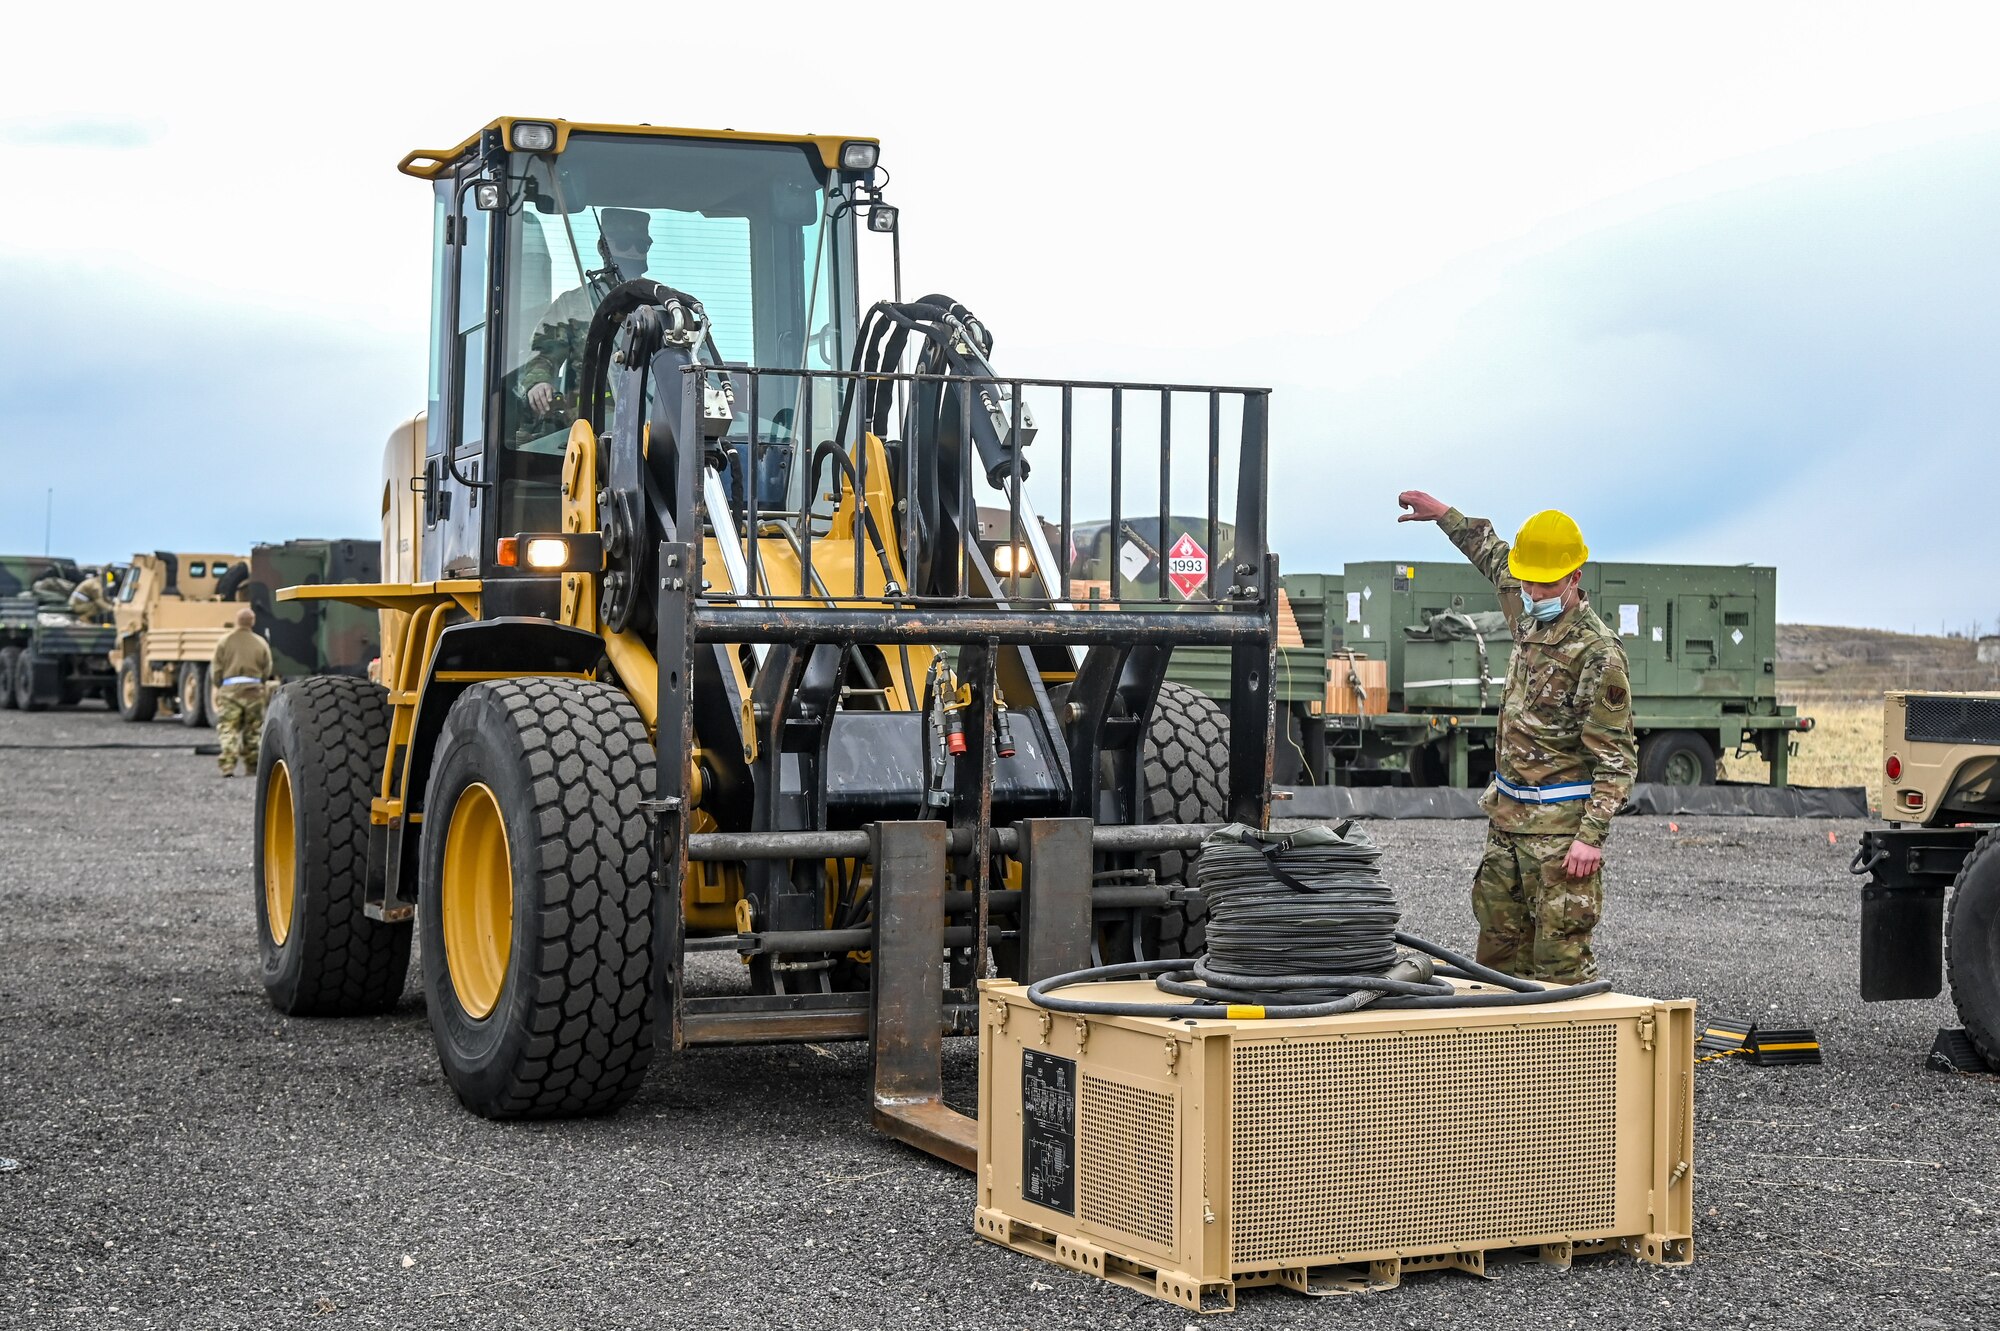 An Airman guides an electrical control unit onto a forklift.